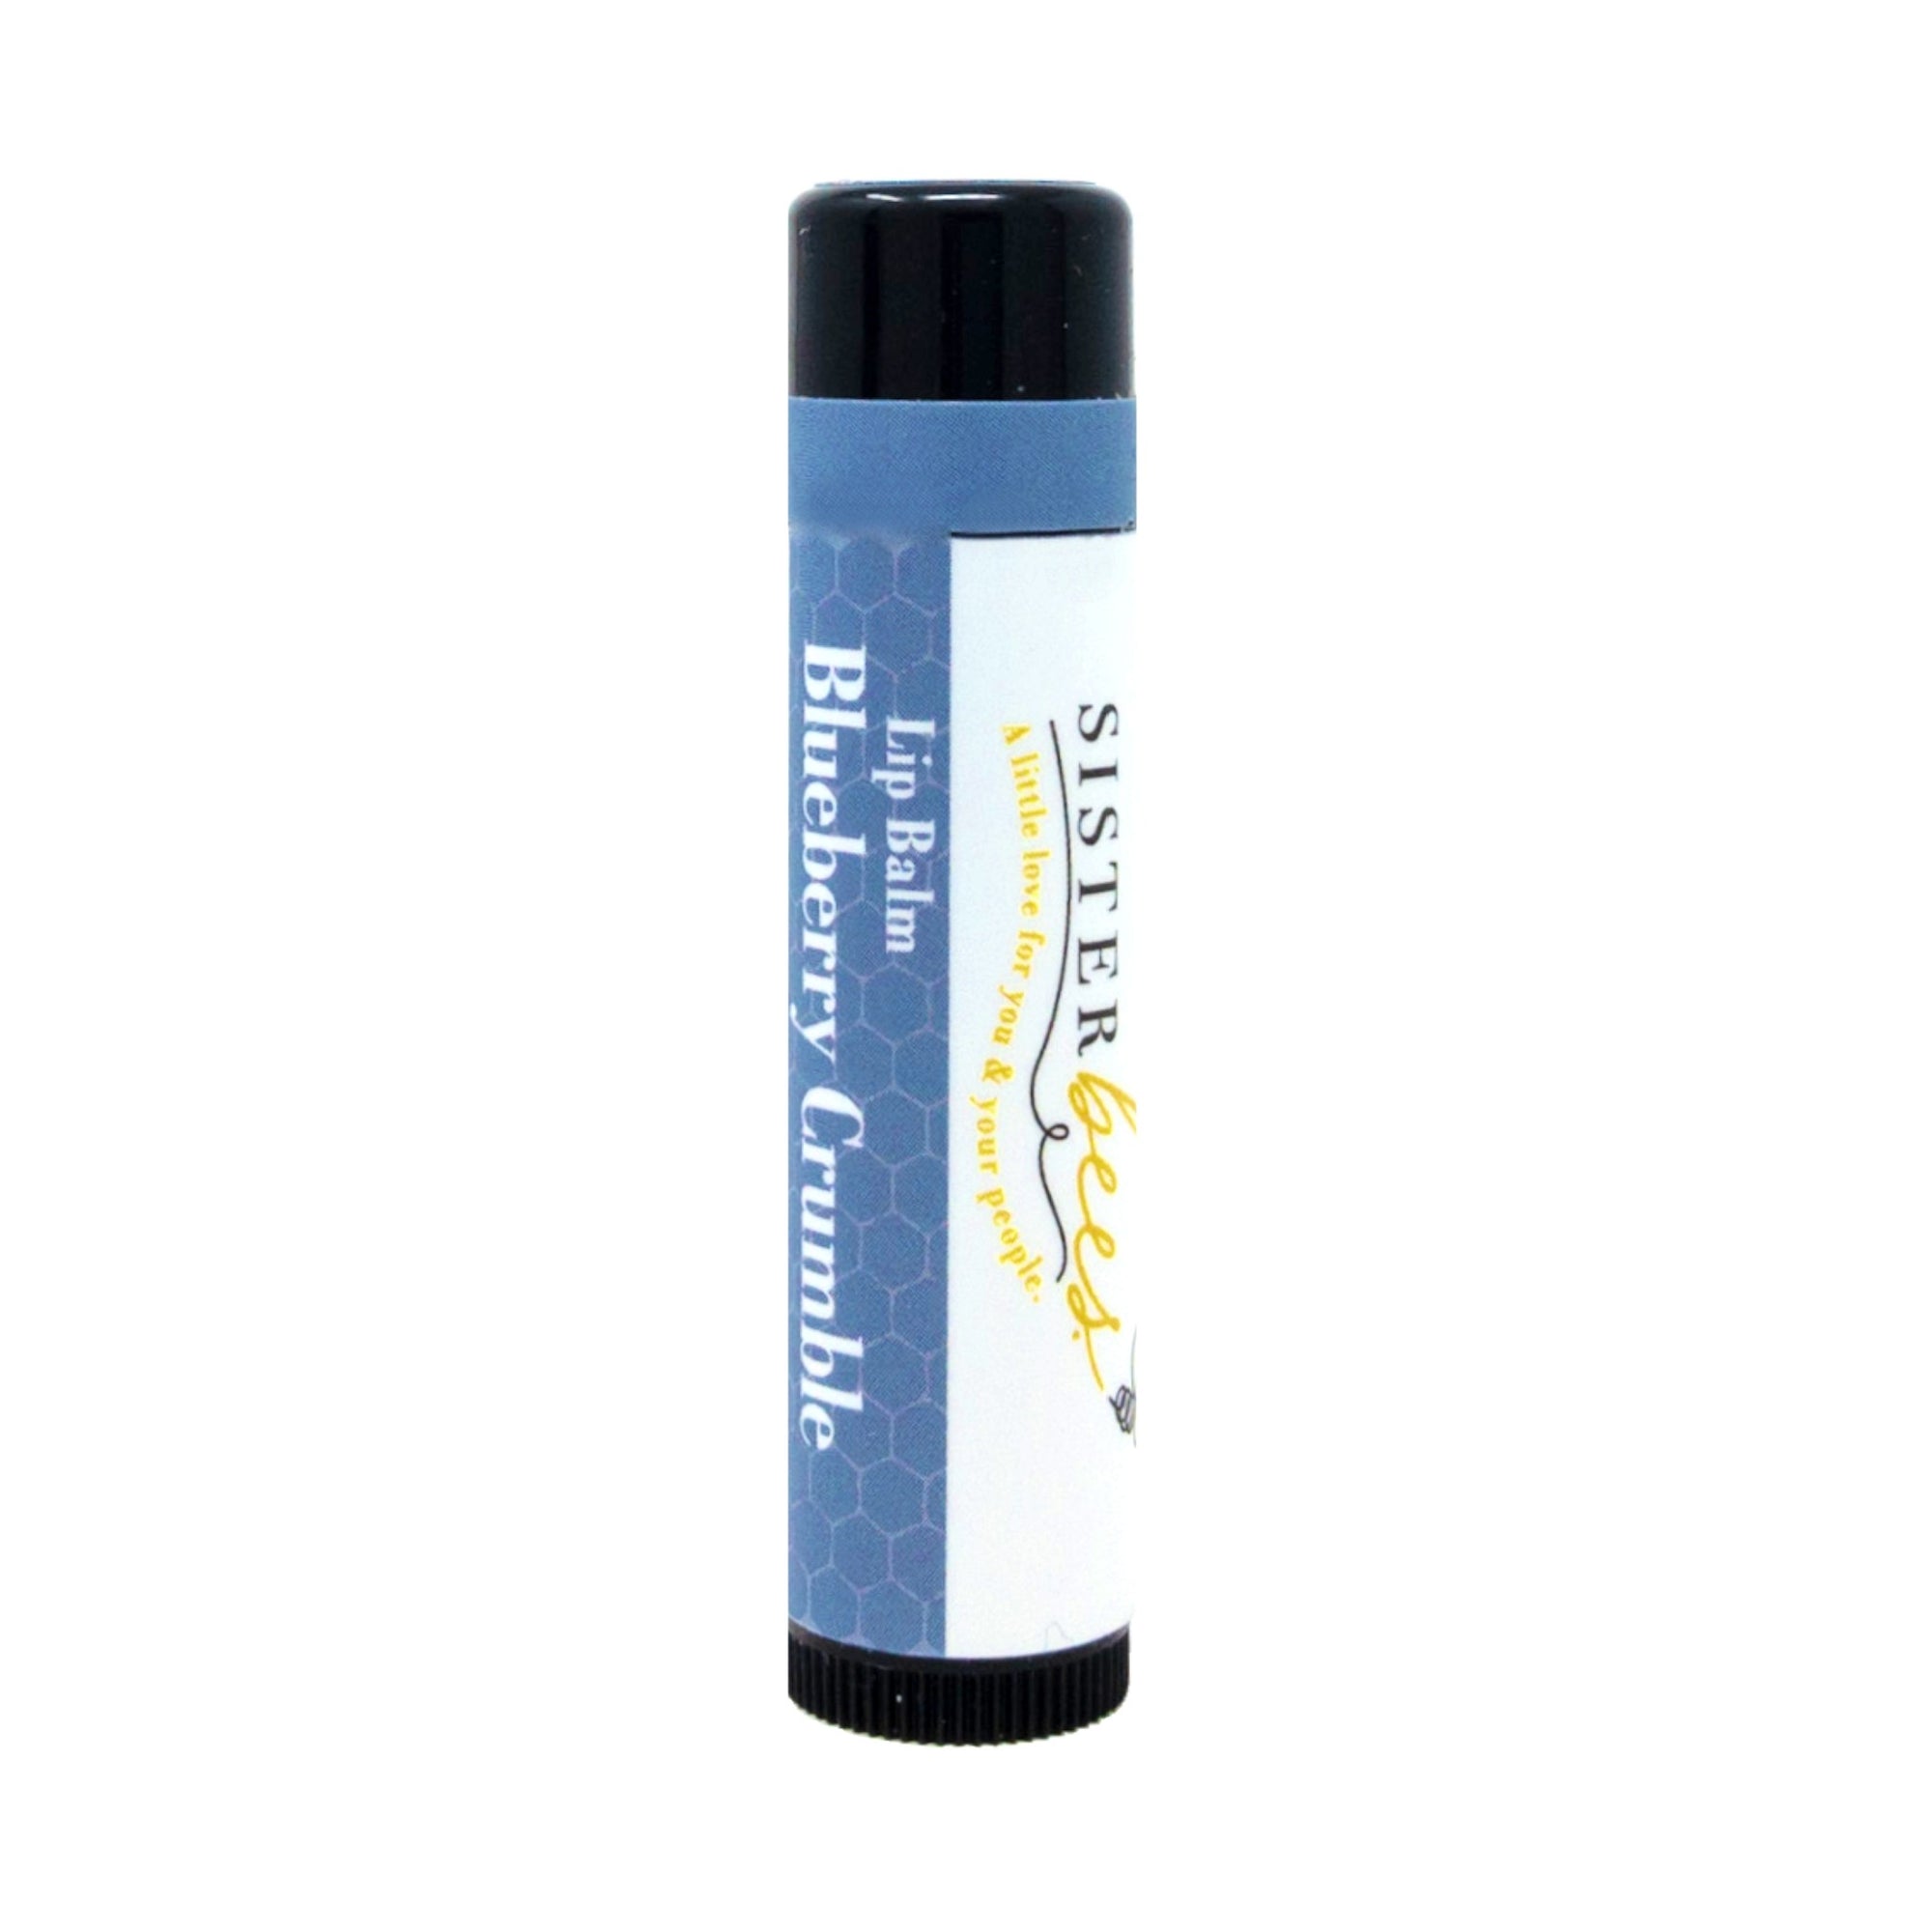 Blueberry Crumble All Natural Beeswax Lip Balm - The Roadside